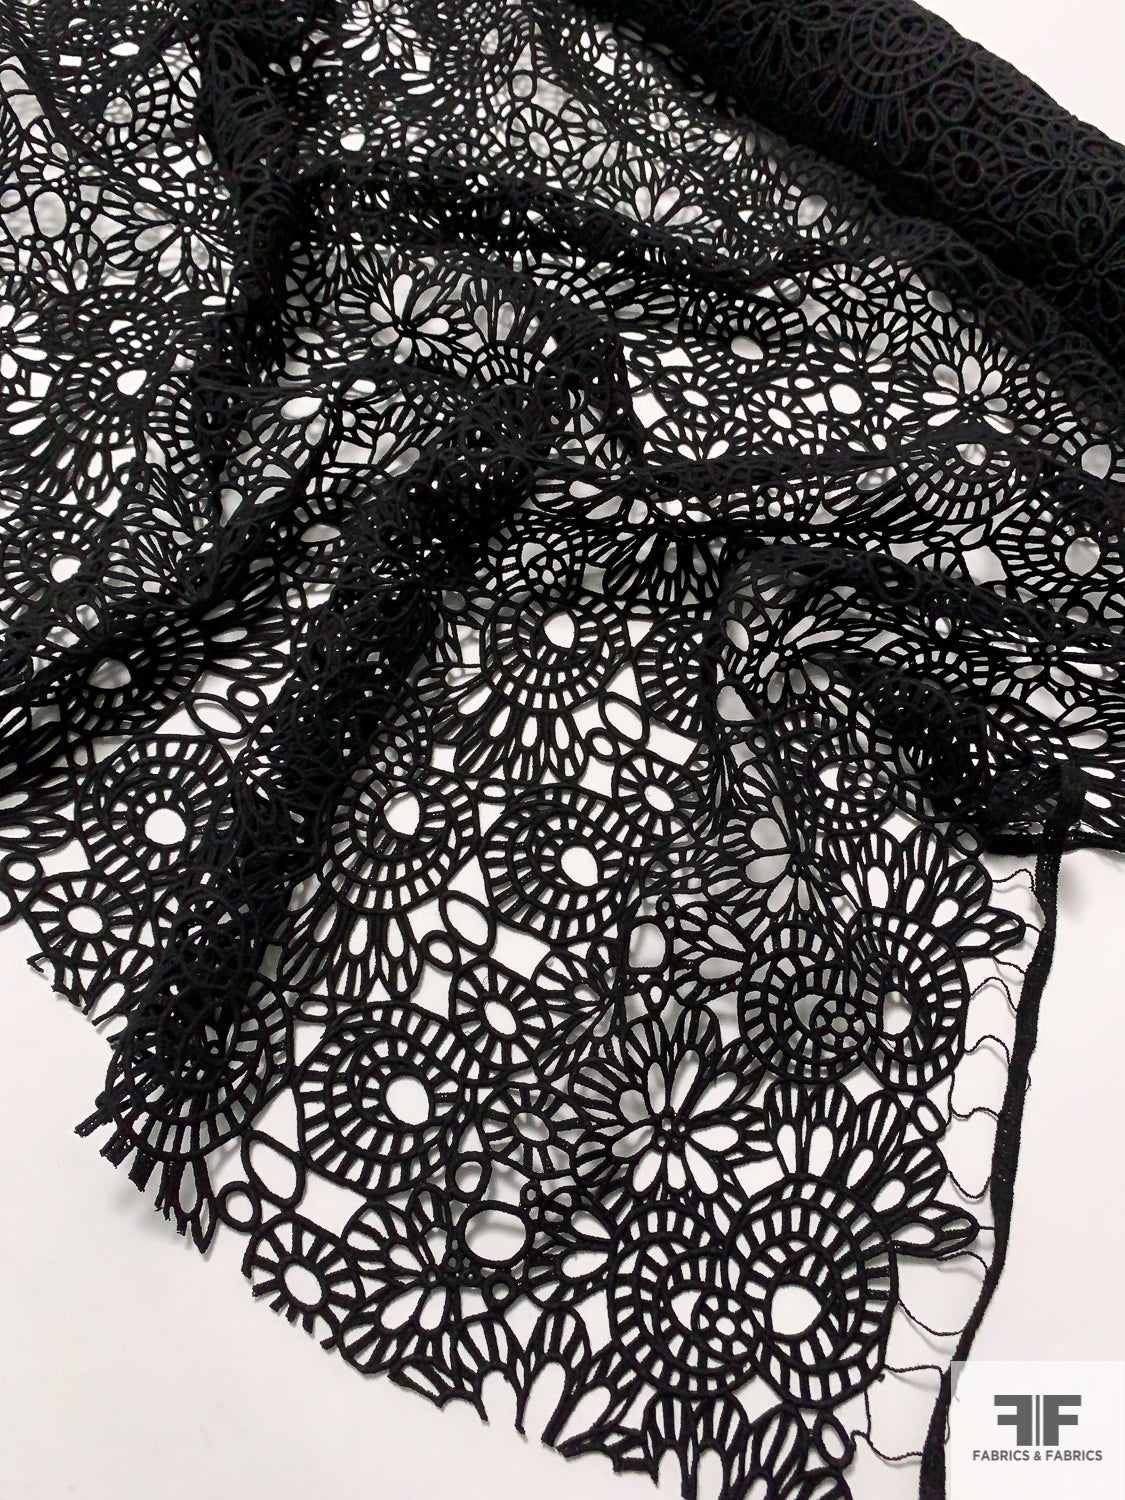 Swirly Web Guipure Lace with Glossy Finish - Black - Fabric by the Yard